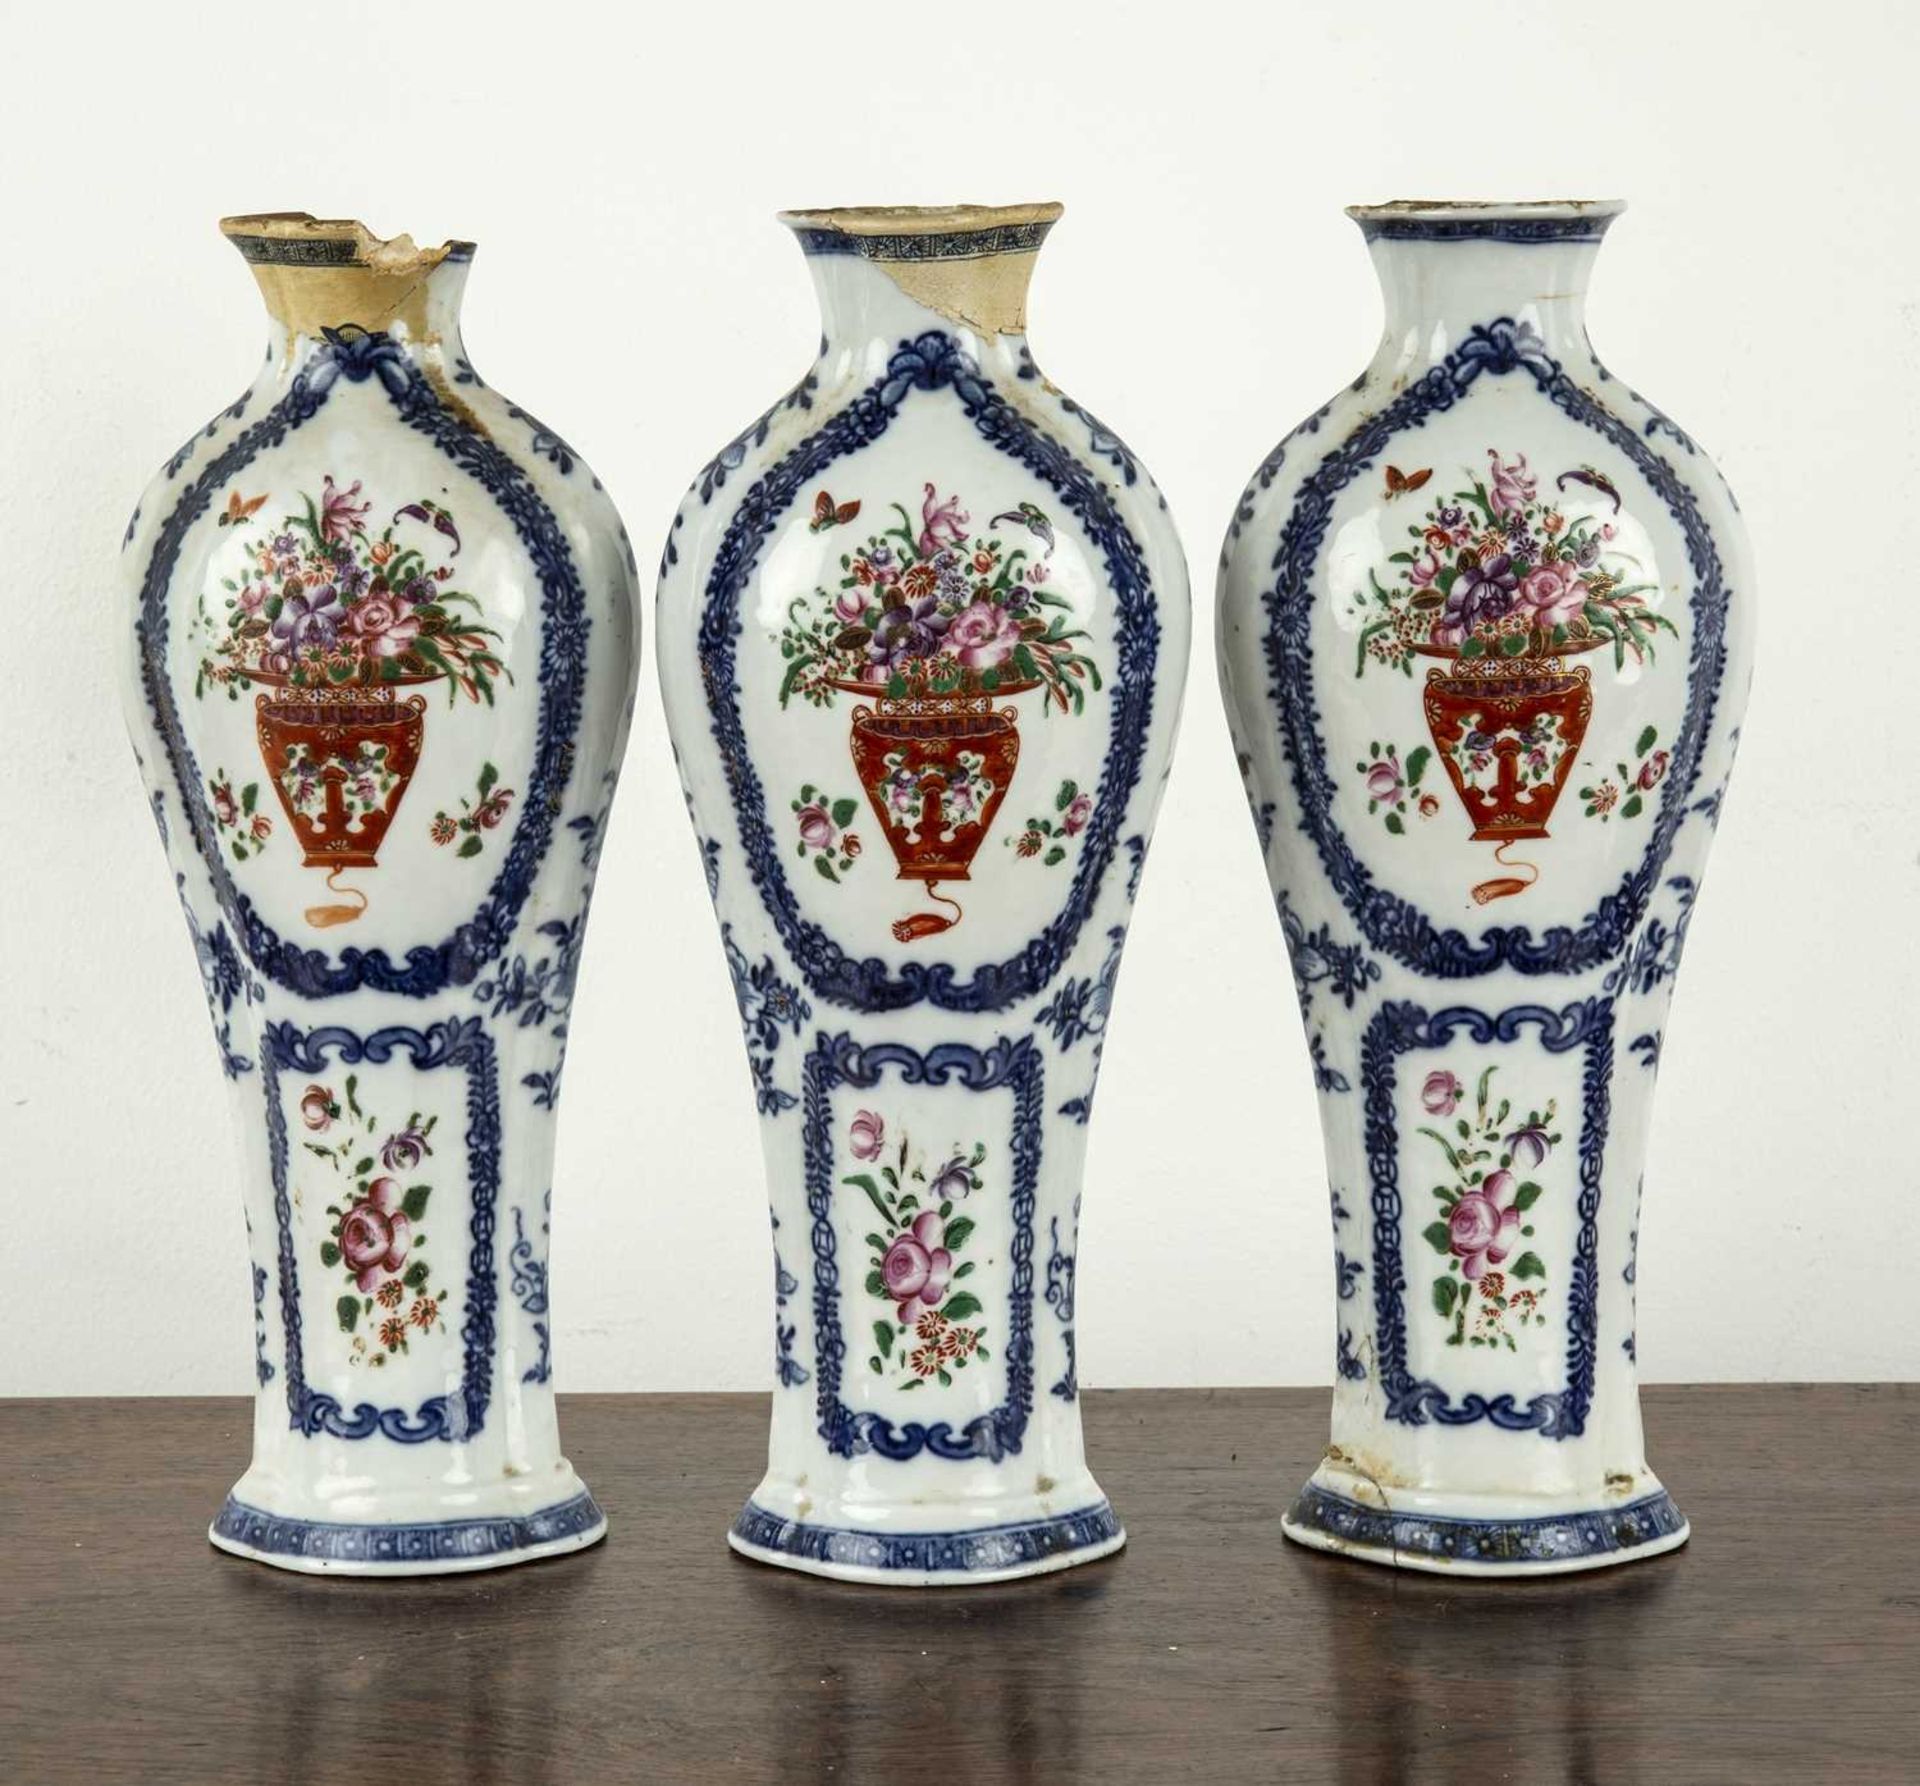 Three piece garniture of famille rose vases Chinese, late 18th Century painted with vases of - Image 2 of 4